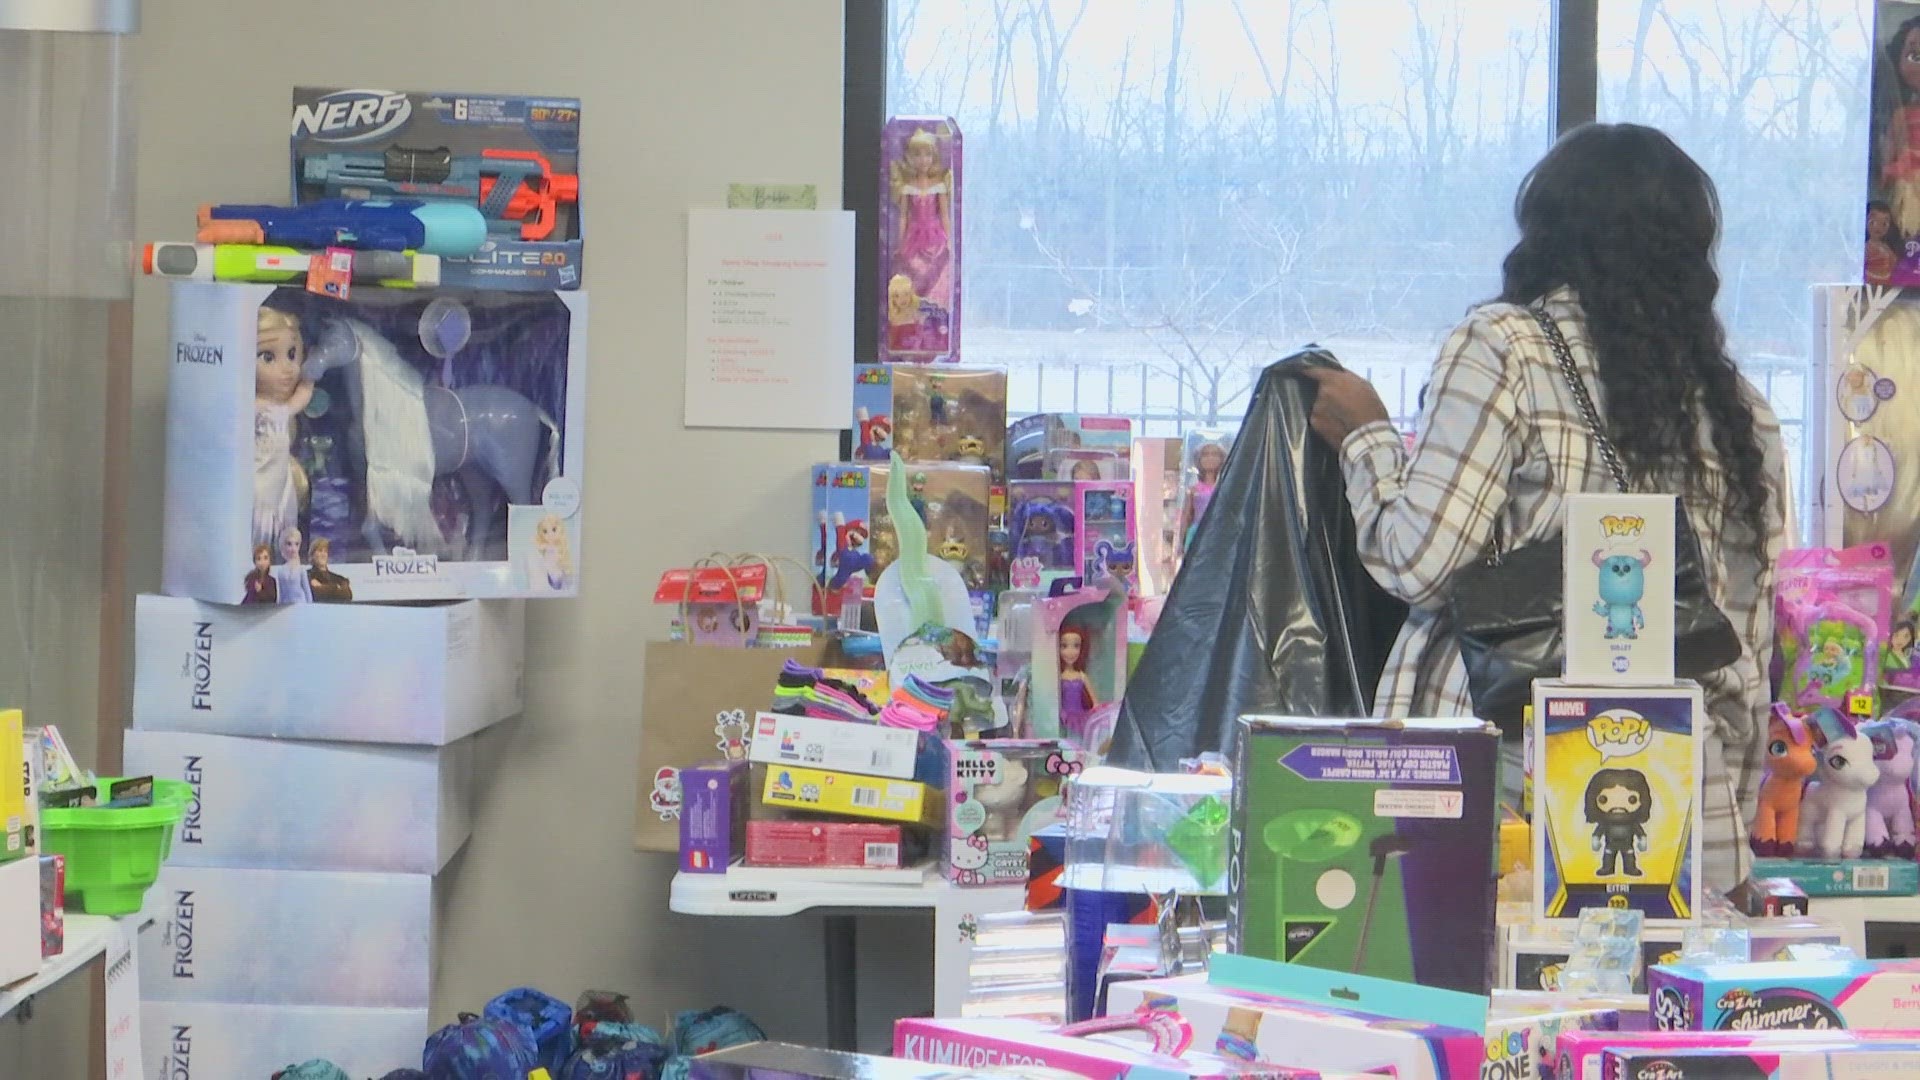 It's been 10 years and the shop continues to be a beacon of hope for families at the shelter.